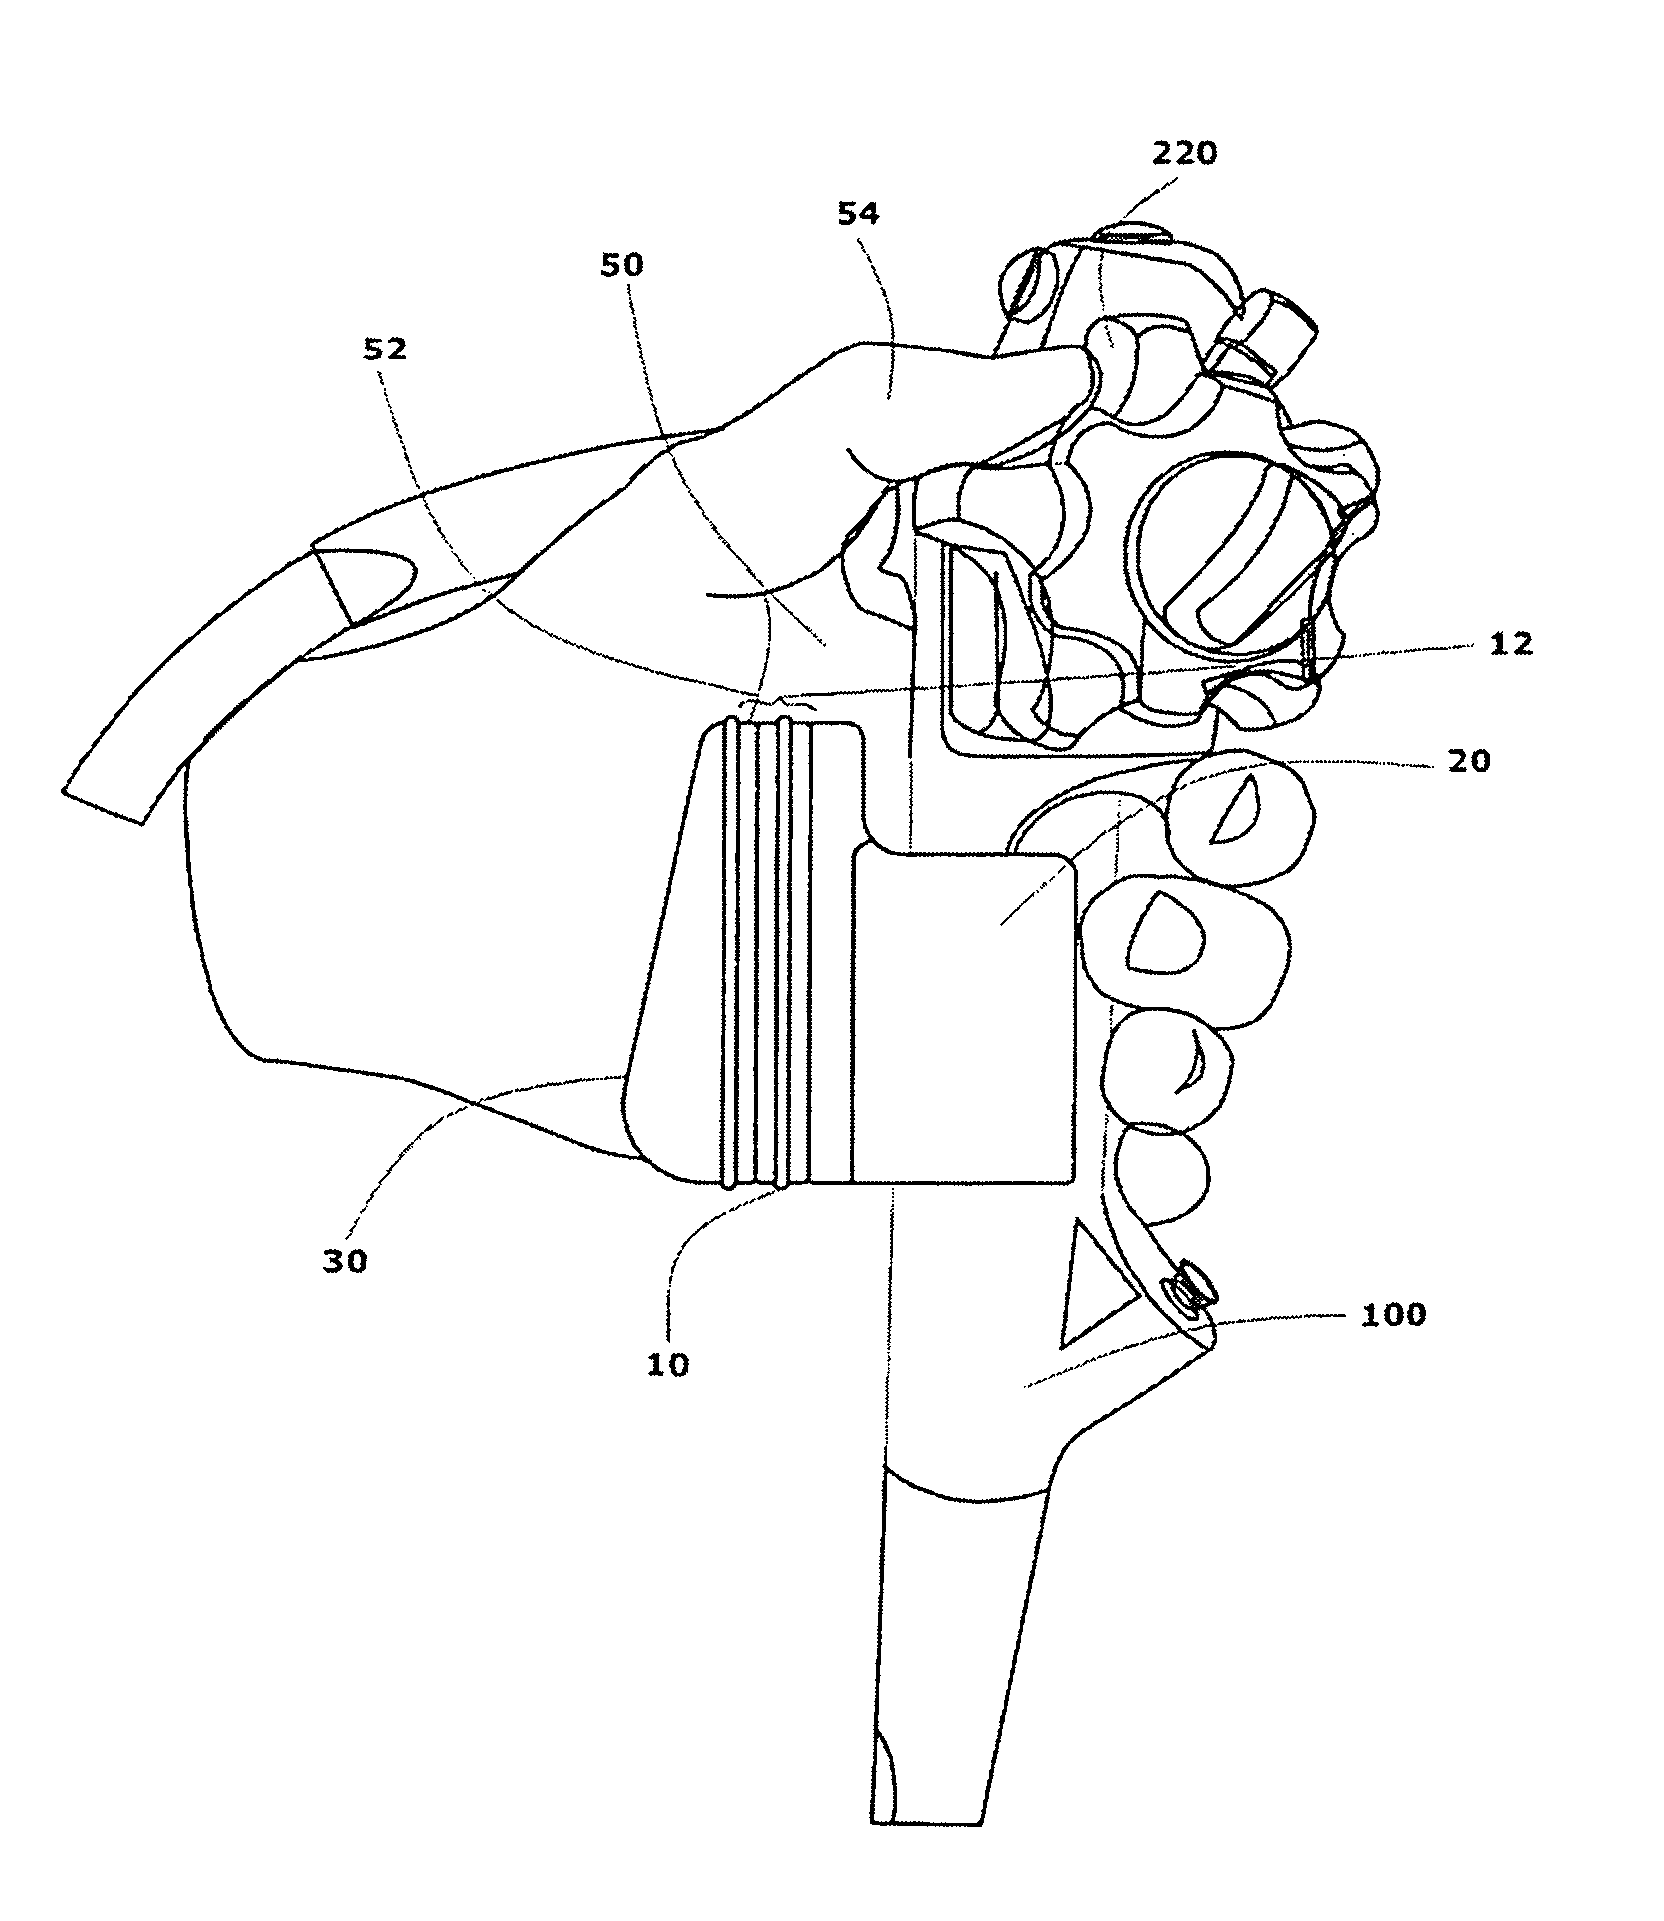 Endoscope hand assist device